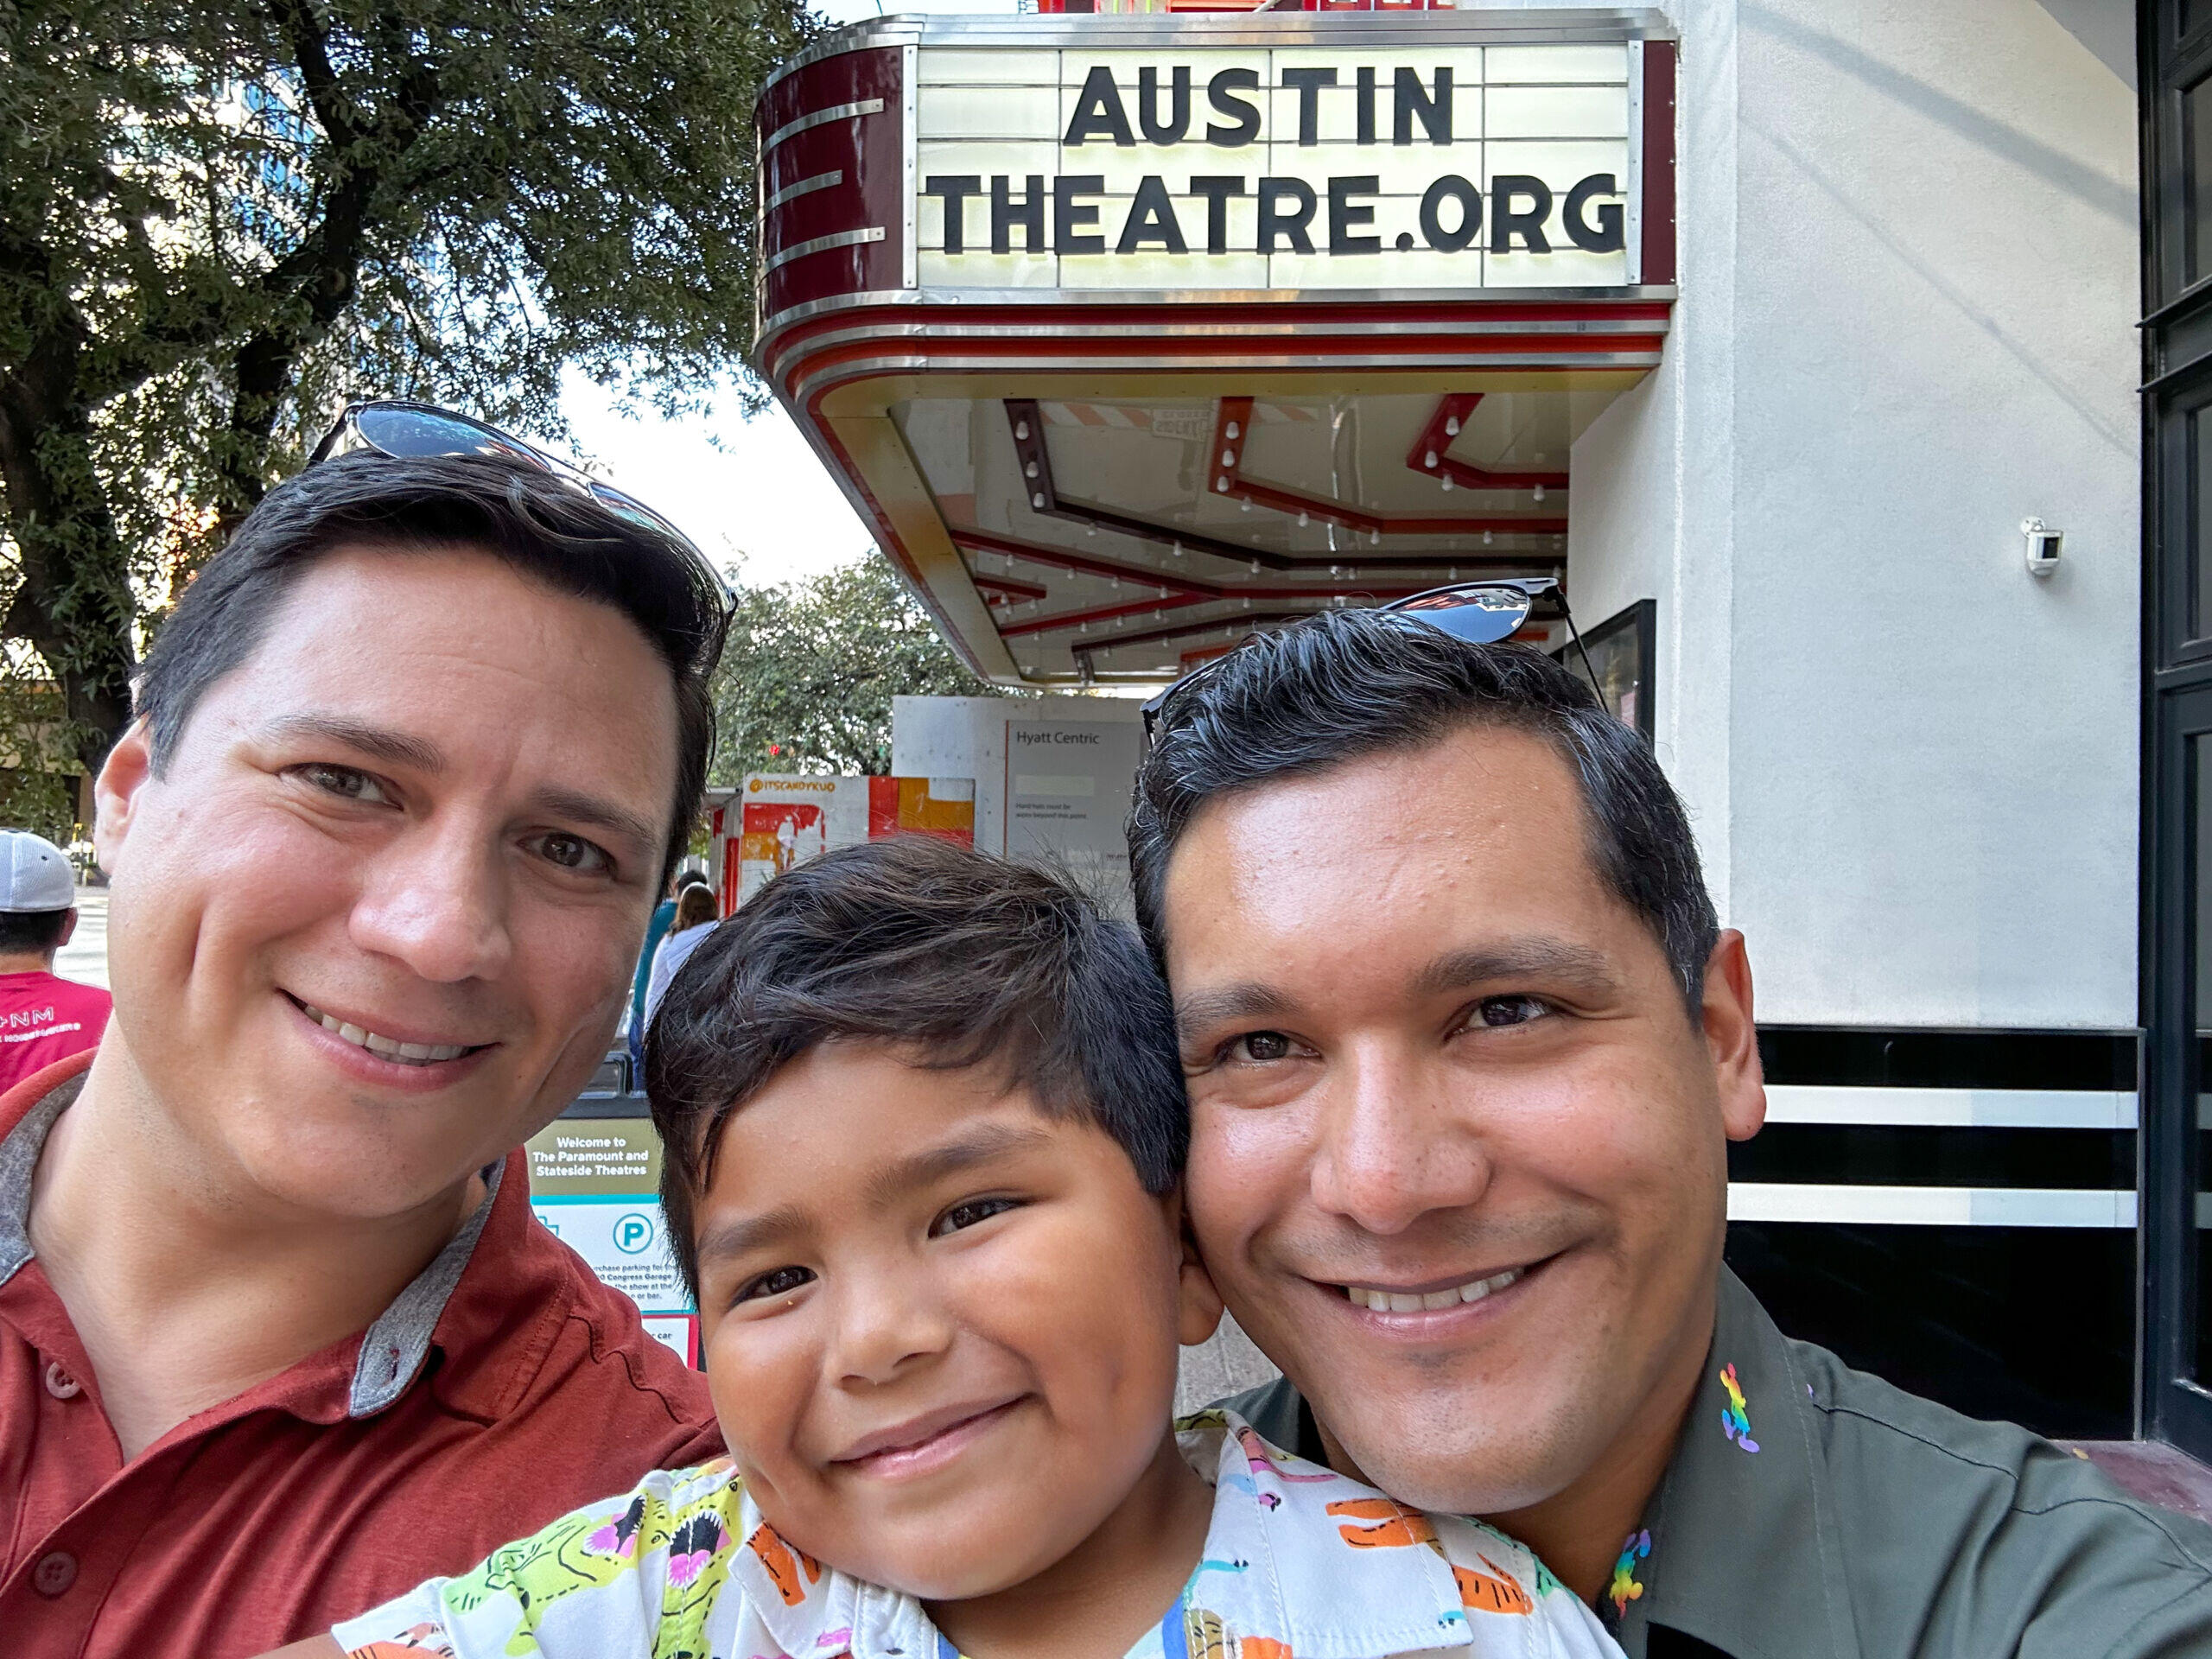 Hispanic adoptive parents with adopted son outside a theater in Austin, TX